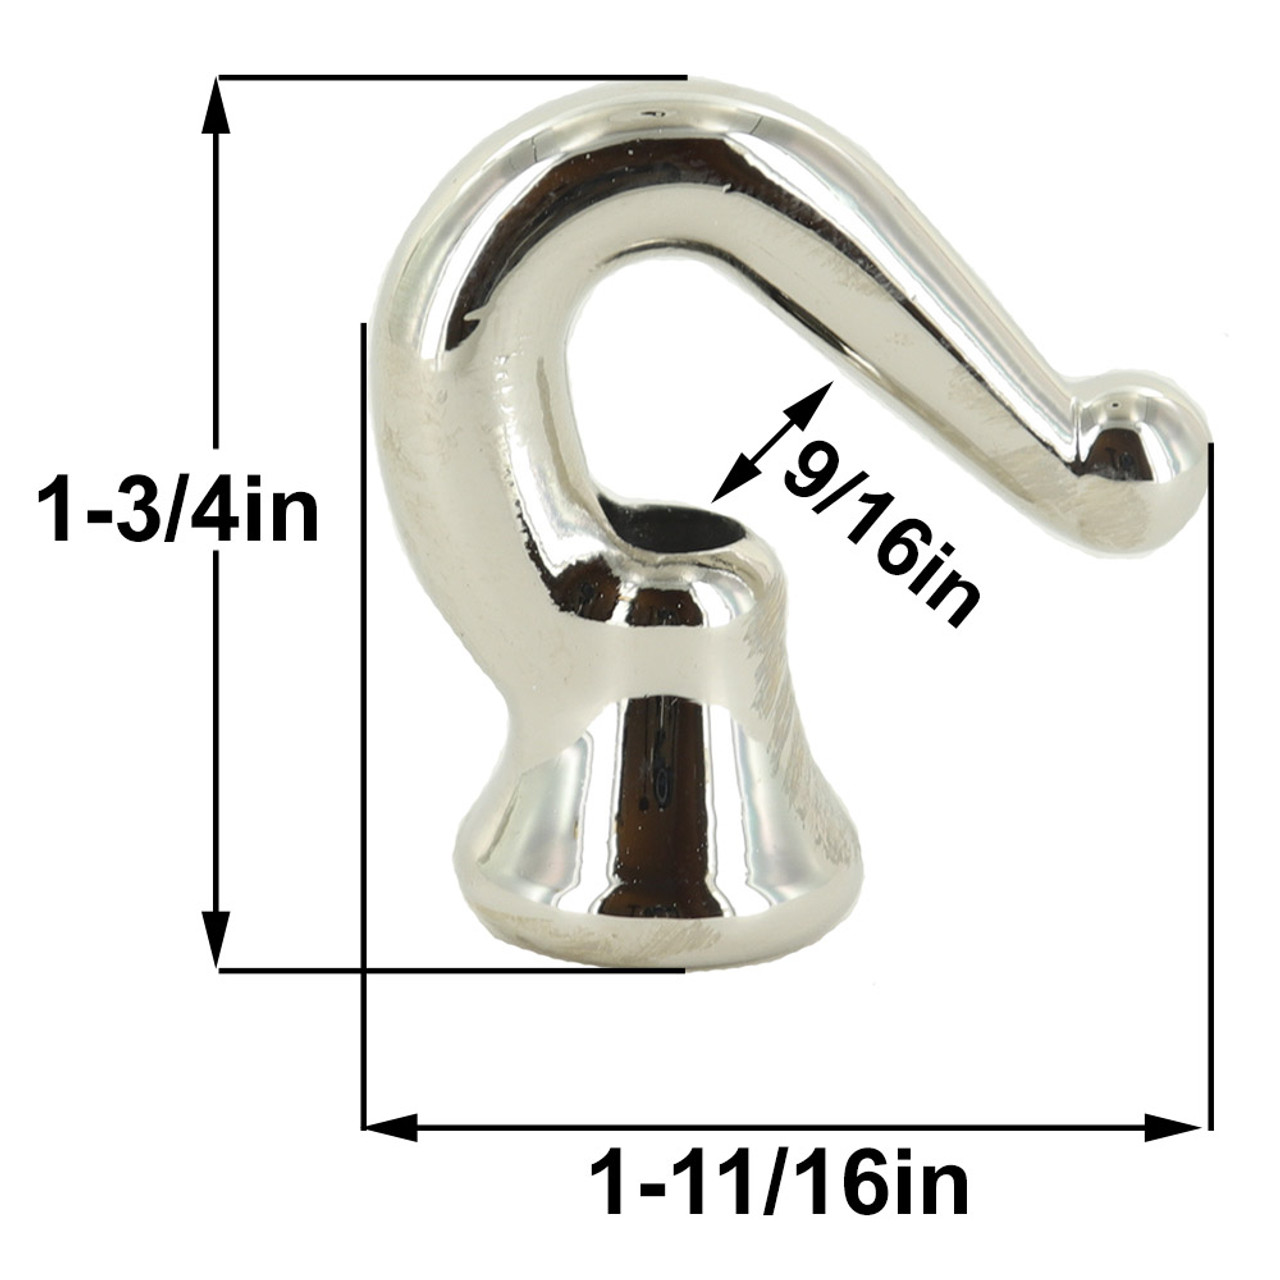 1/8ips - 1-3/4in. Solid Brass Hook - Polished Nickel Finish